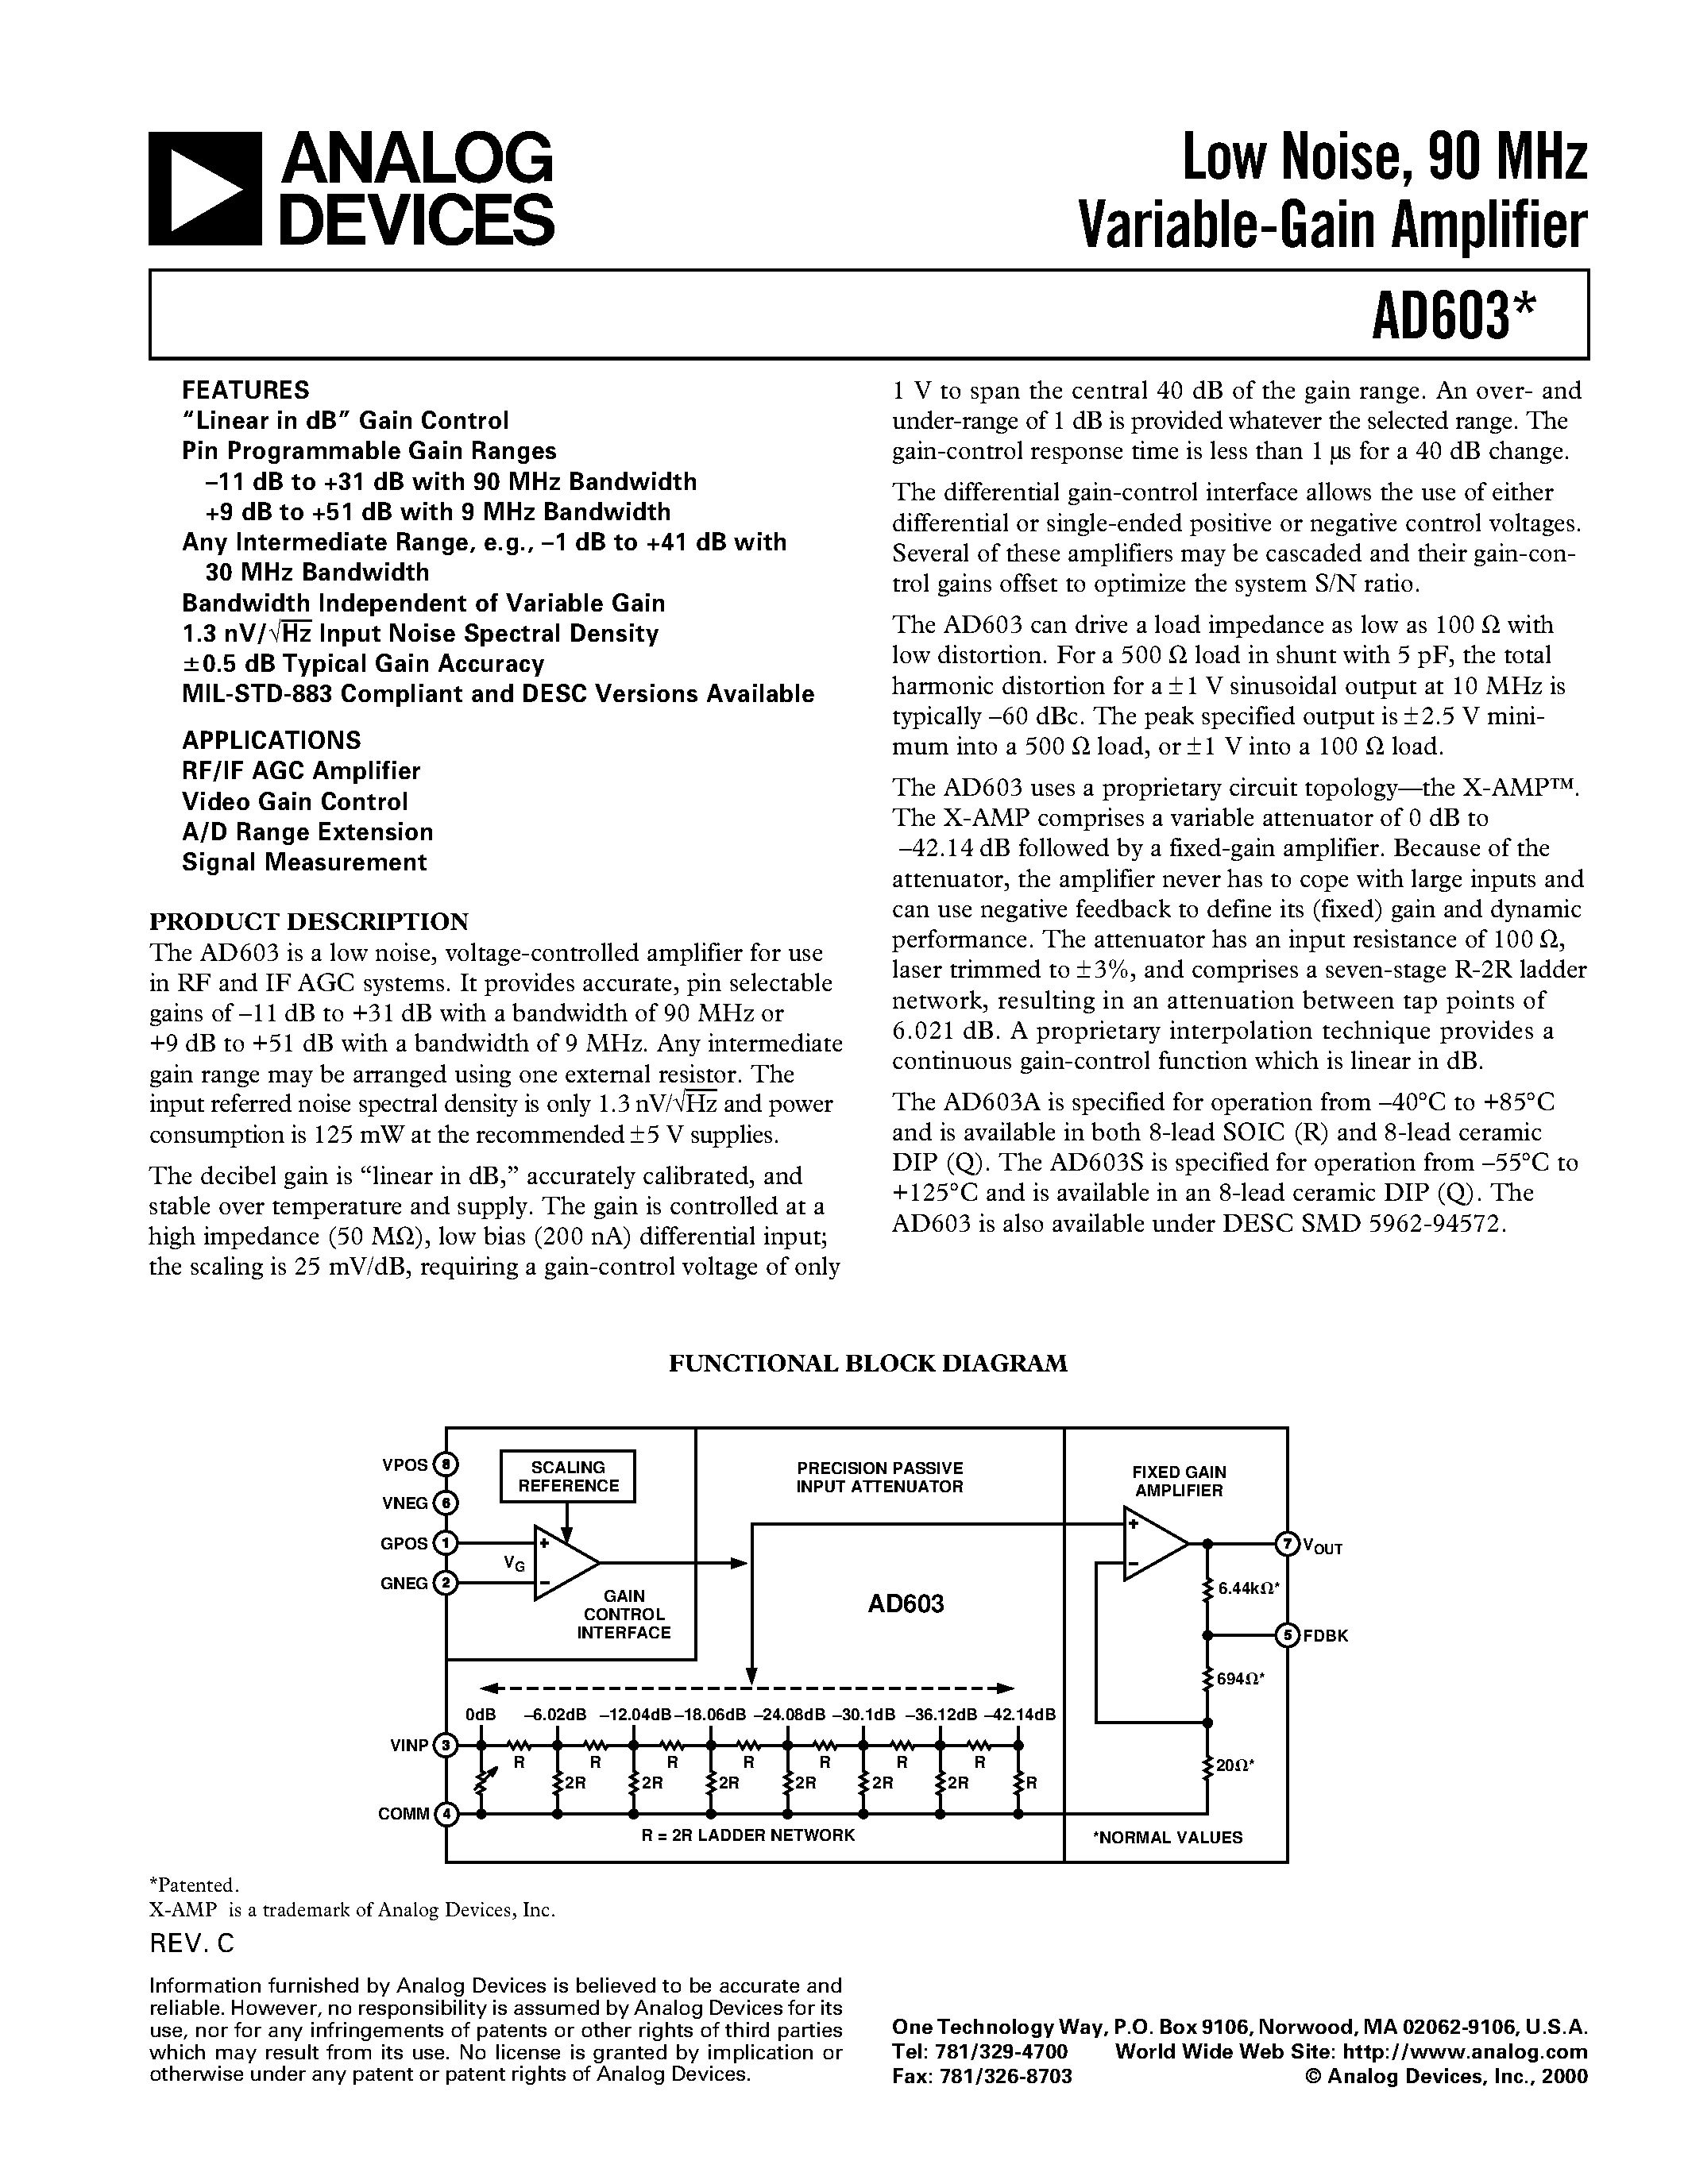 Datasheet AD603-EB - Low Noise/ 90 MHz Variable-Gain Amplifier page 1